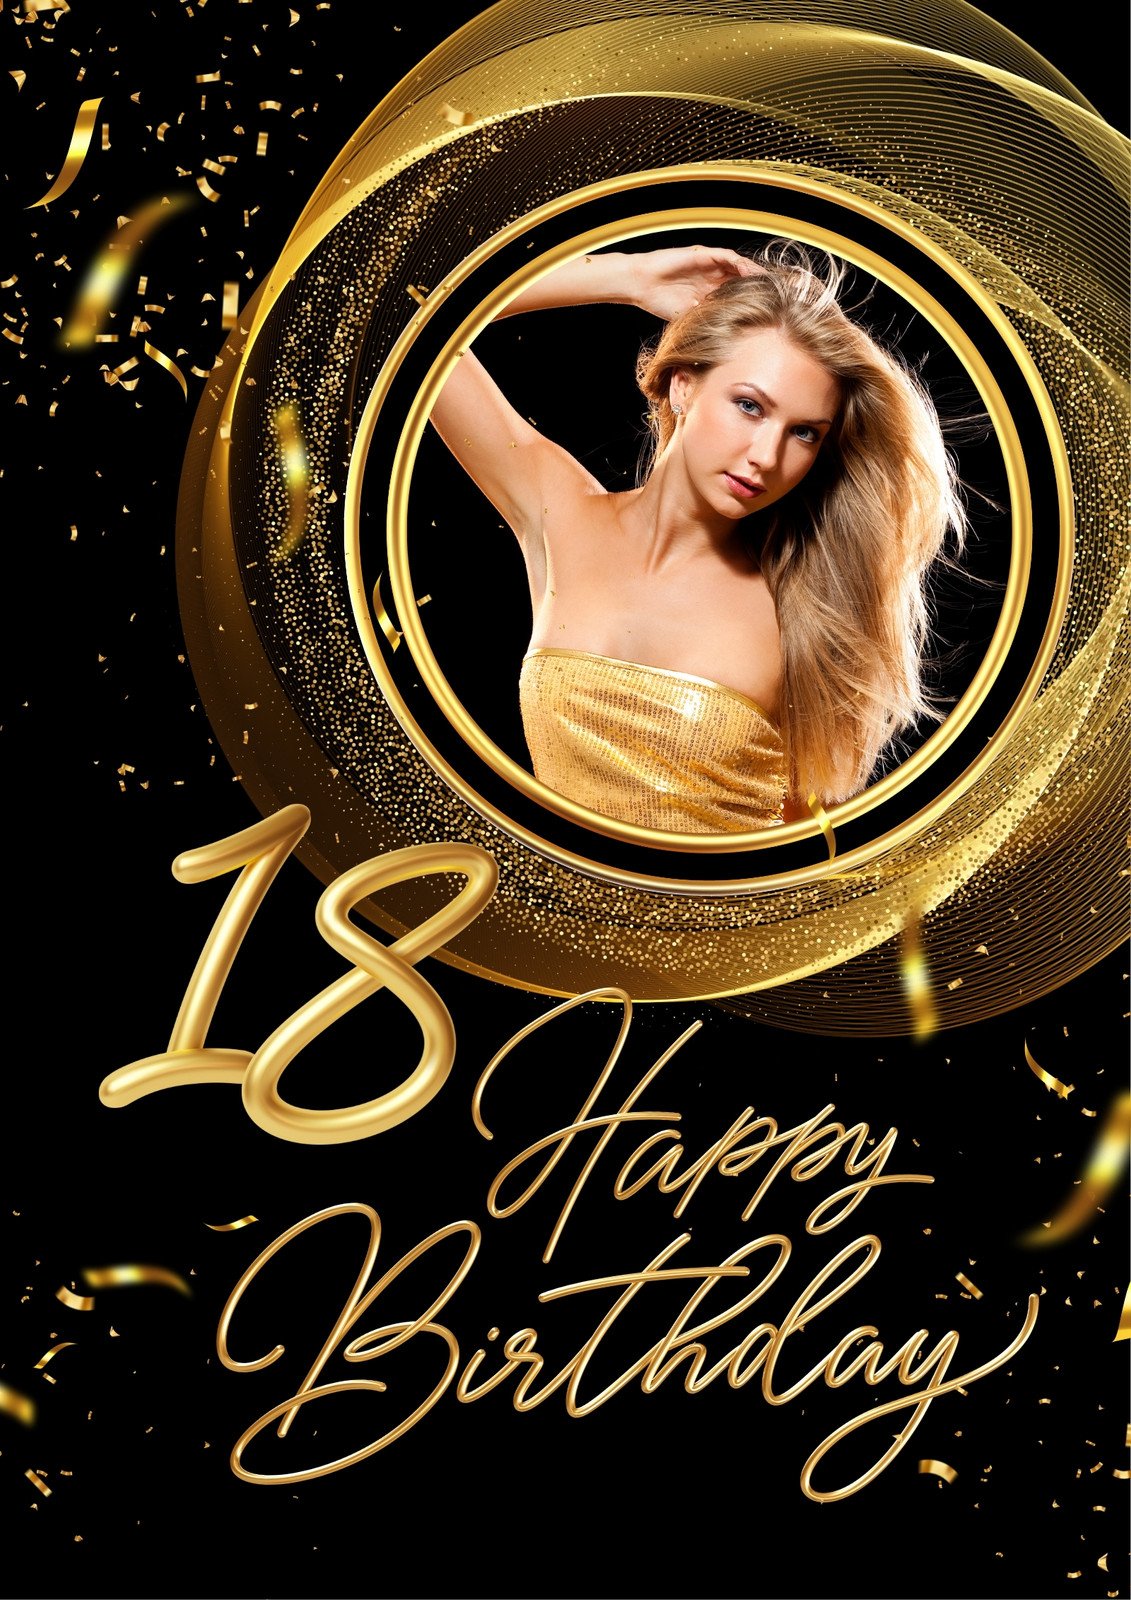 Free and fun birthday poster templates to customize | Canva